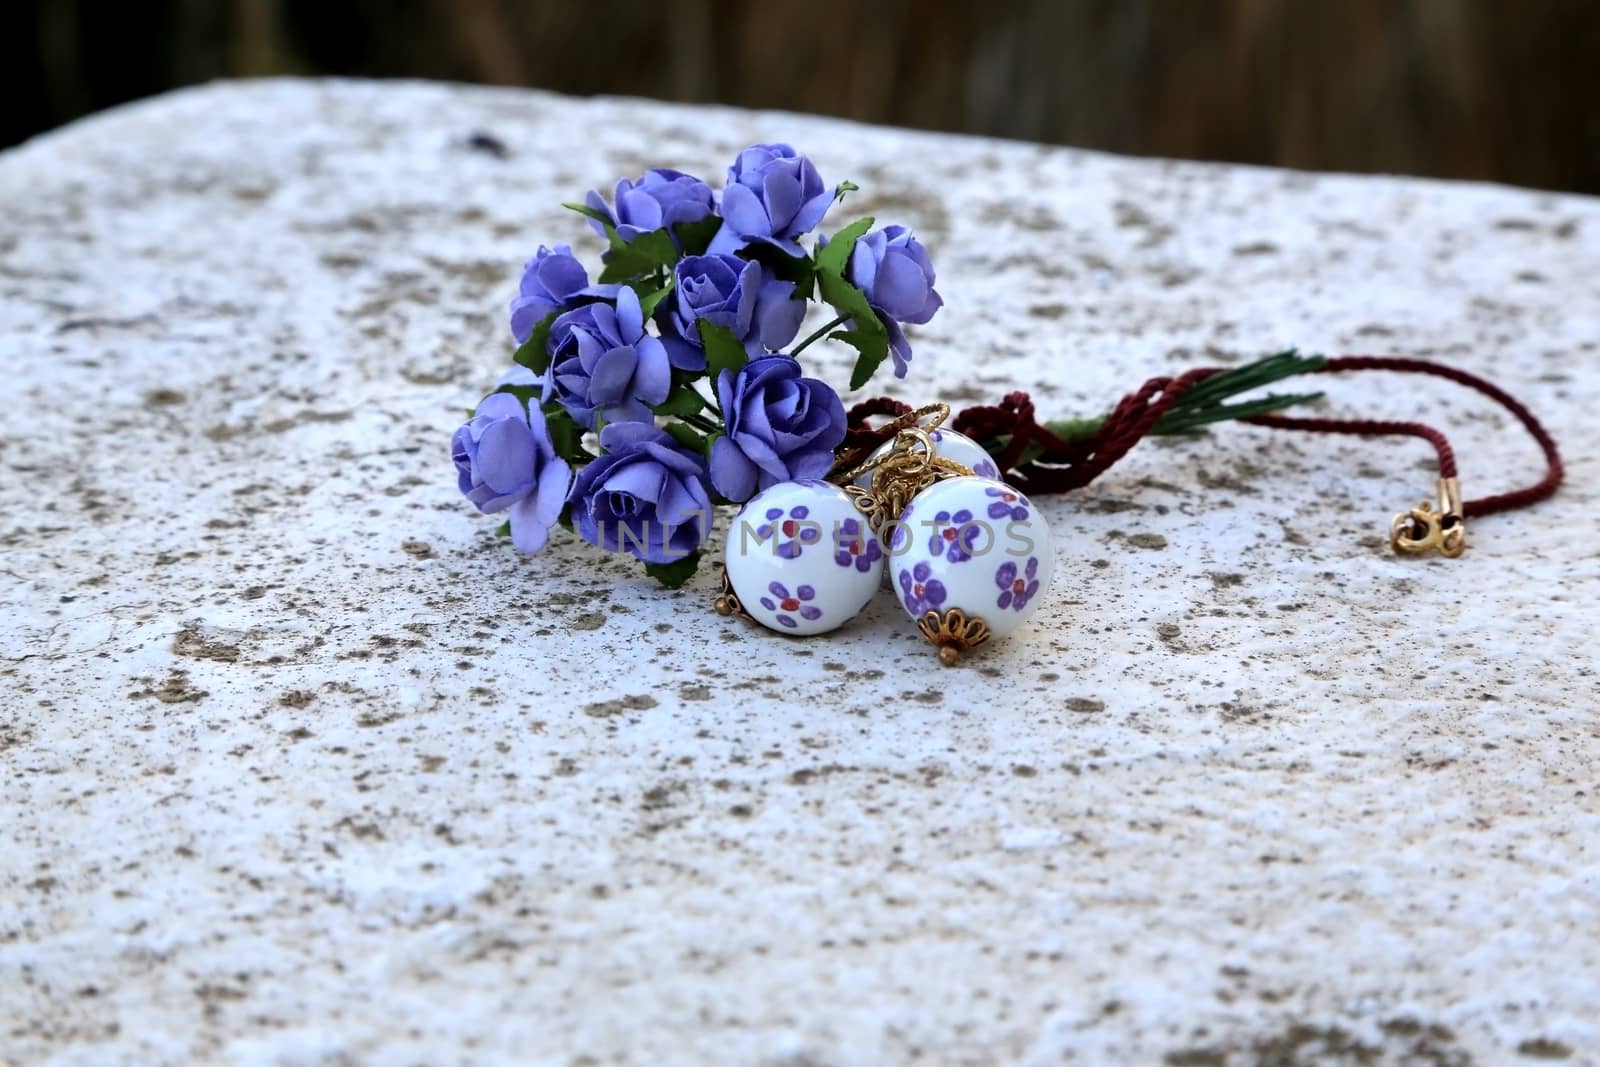 Artisanal Sicilian ceramic pendent and the bunch of violet paper roses